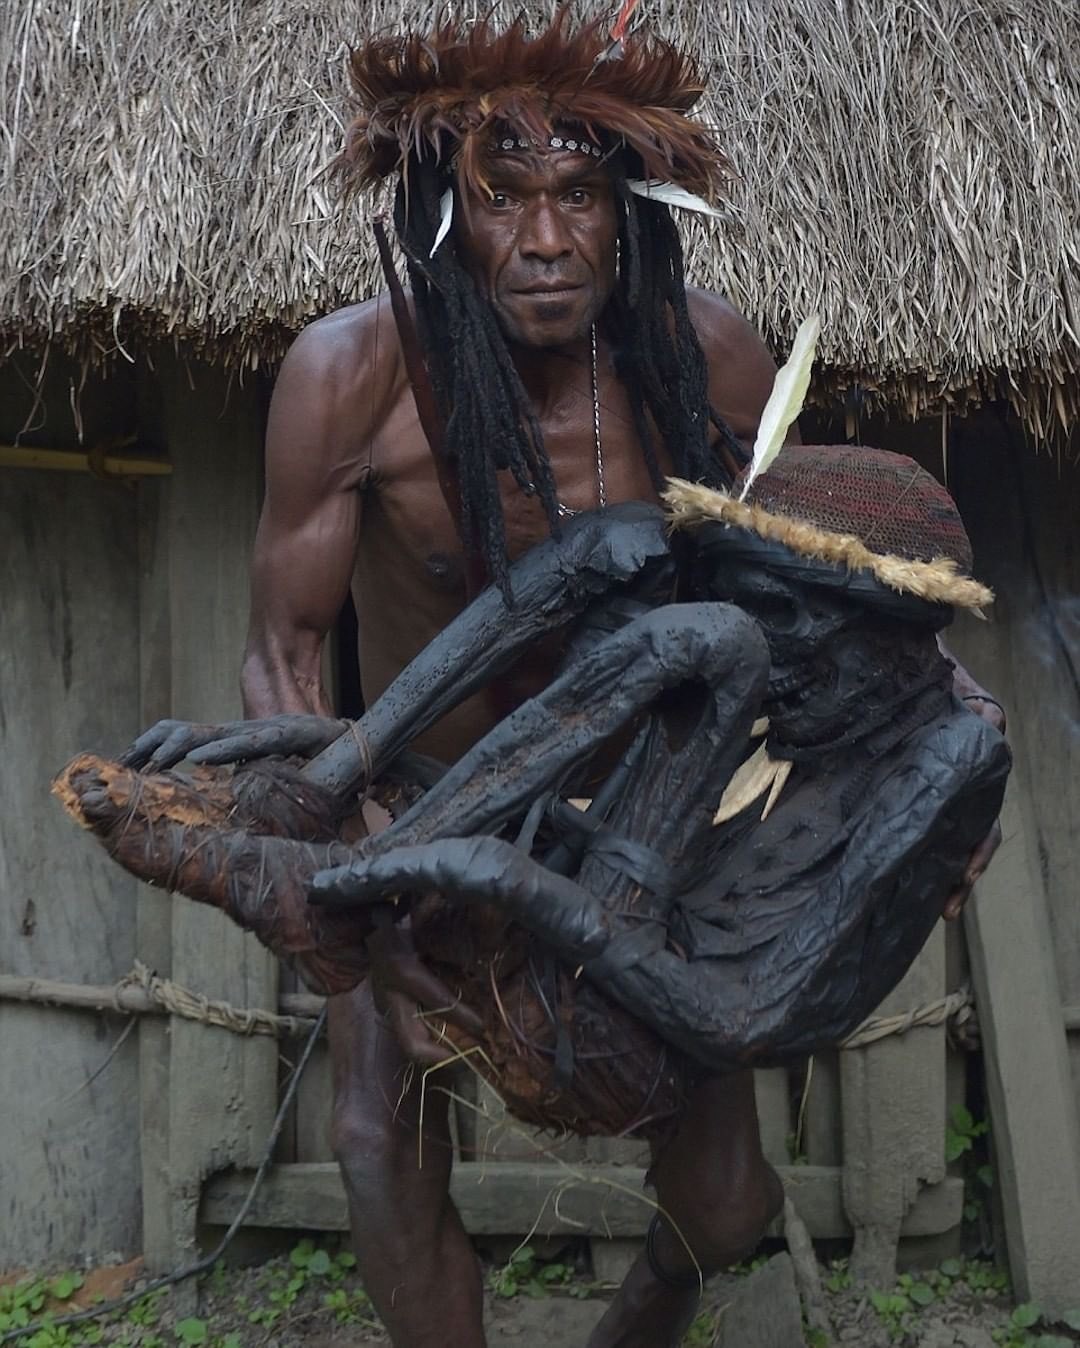 Tribal Chief Eli Mabel Holds The Body Of His Ancestor, Agat Mamete Mabel. Agat Mamete Mabel, Was A Tribal Chief Who Ruled A Remote Village In Papua, Indonesia, Some 250 Years Ago